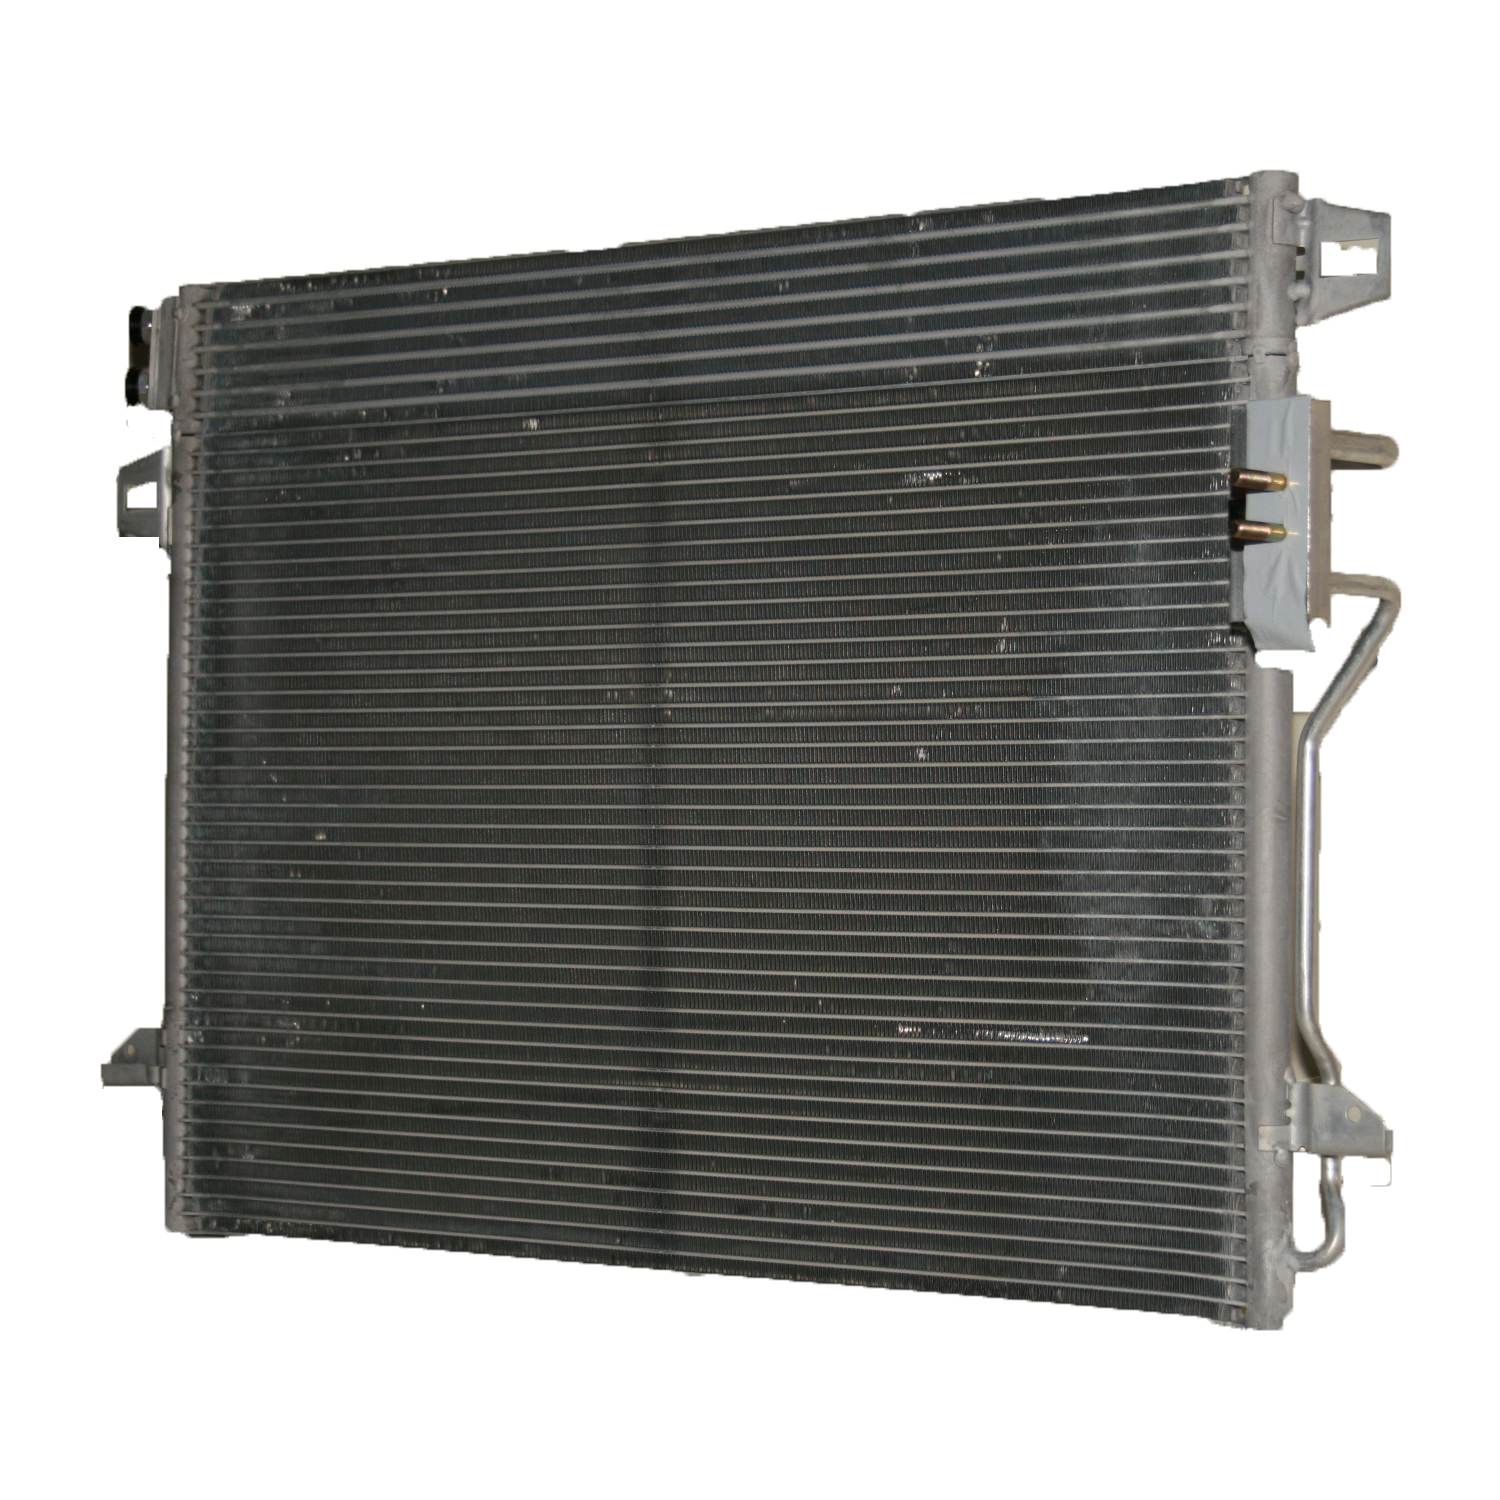 TCW Condenser 44-3682 New Product Image field_60b6a13a6e67c